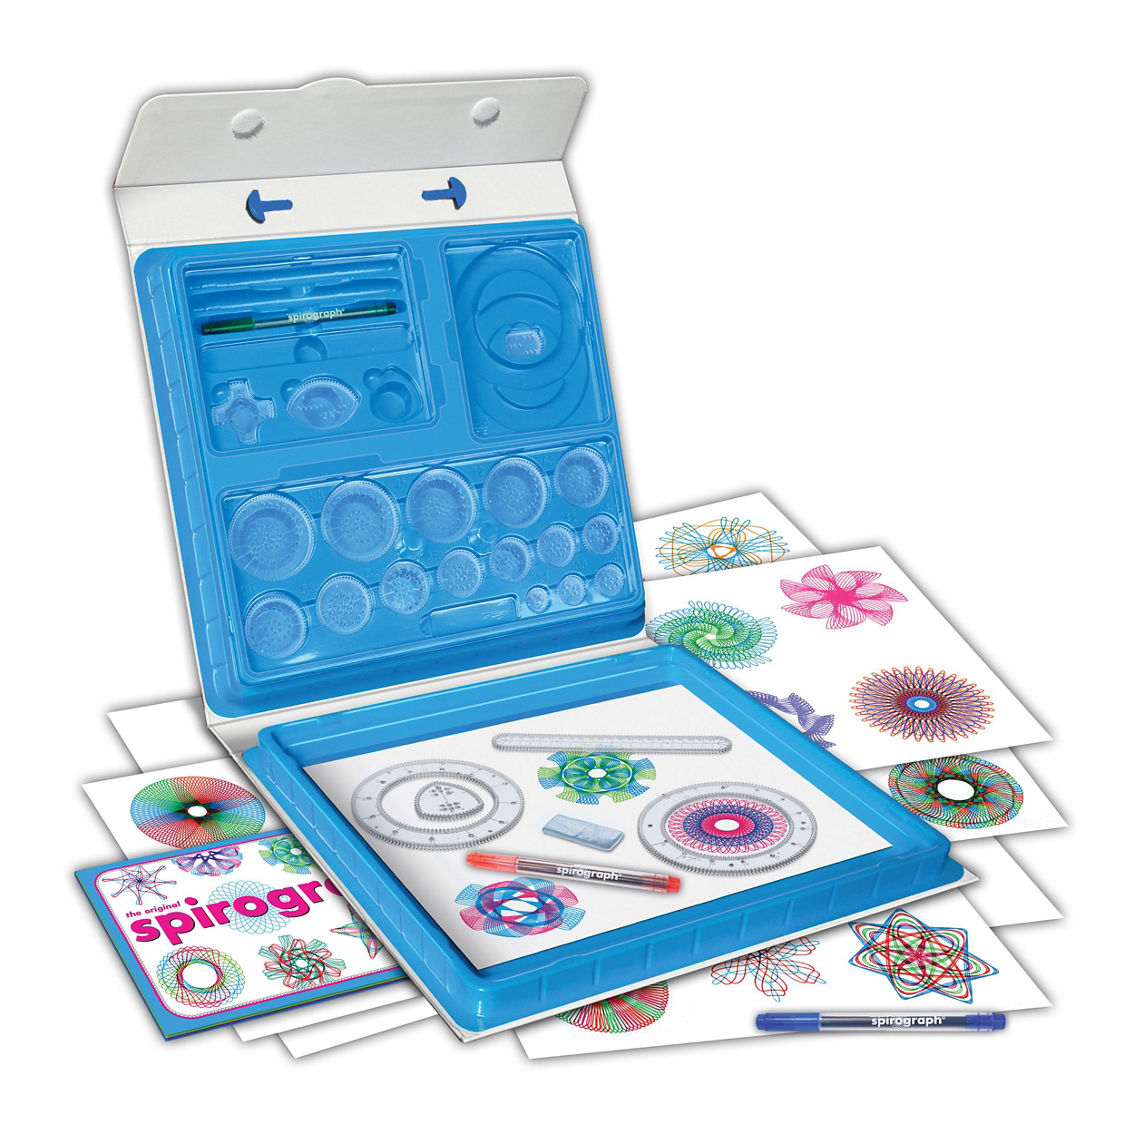 Spirograph Deluxe Set - Image 2 of 3